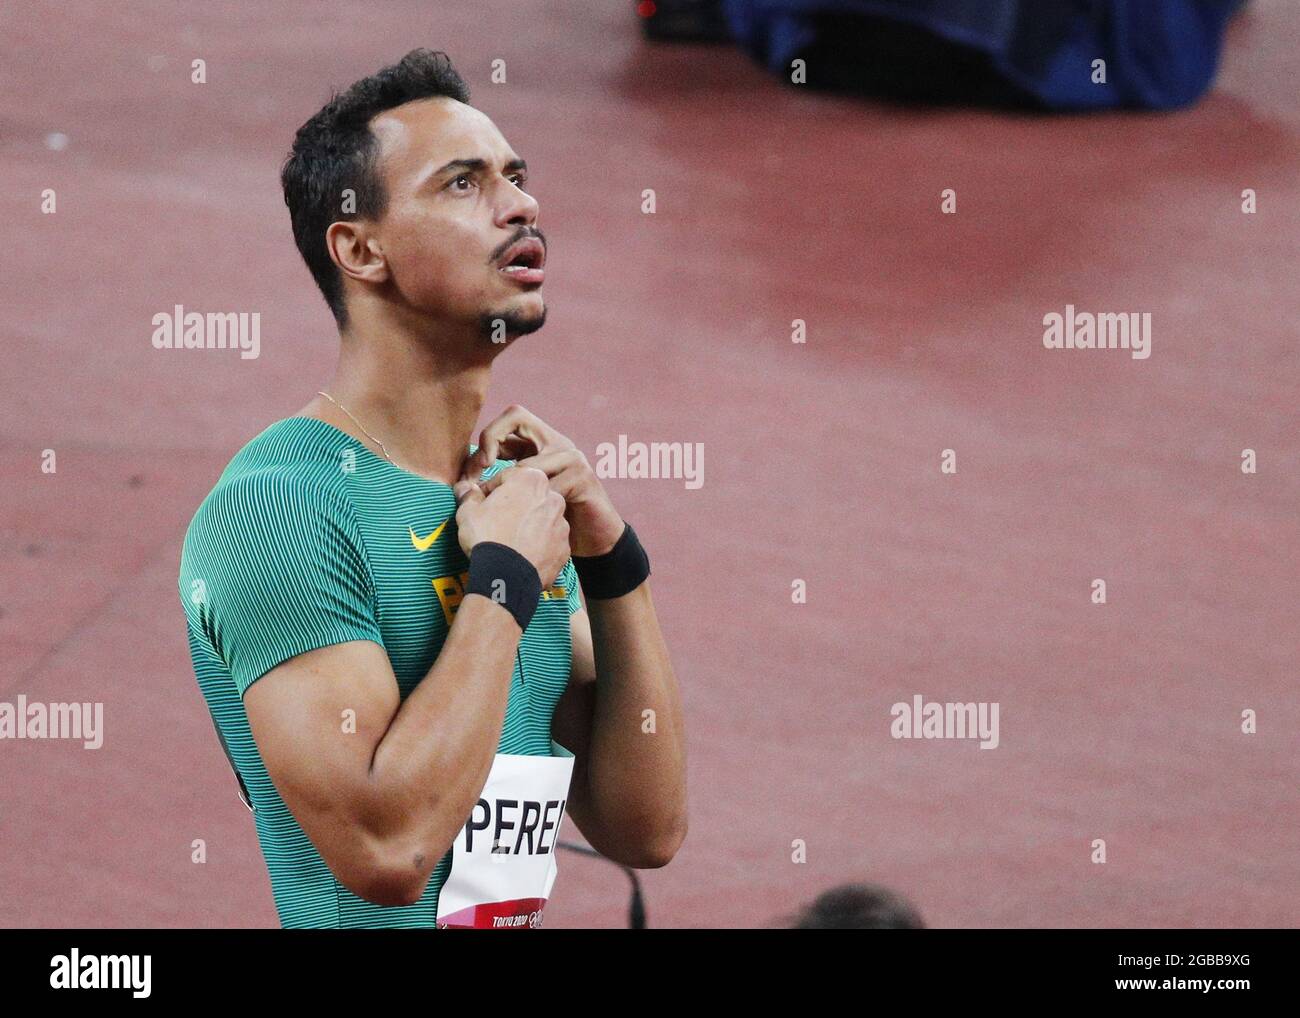 Tokyo, Japan. 03rd Aug, 2021. Rafael Pereira of Brazil reacts after competing in round 1 of the Men's 110m hurdles at the Tokyo 2020 Summer Olympic Games in Tokyo, Japan on Tuesday, August 3, 2021. Photo by Bob Strong/UPI Credit: UPI/Alamy Live News Stock Photo